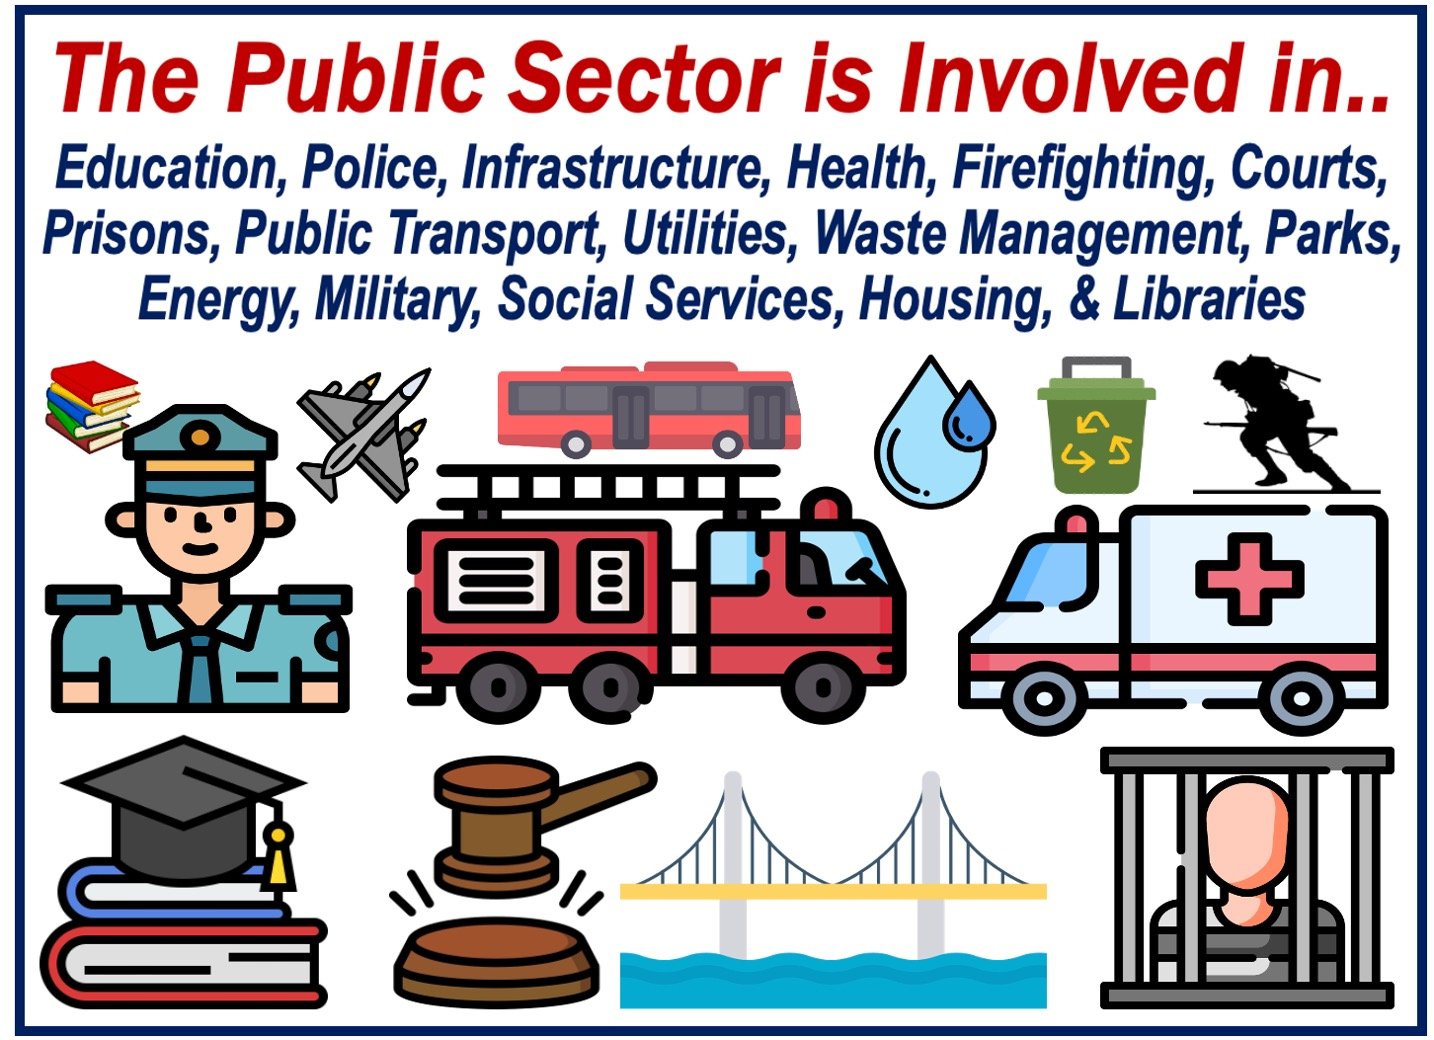 Image showing 13 roles of the public sector.